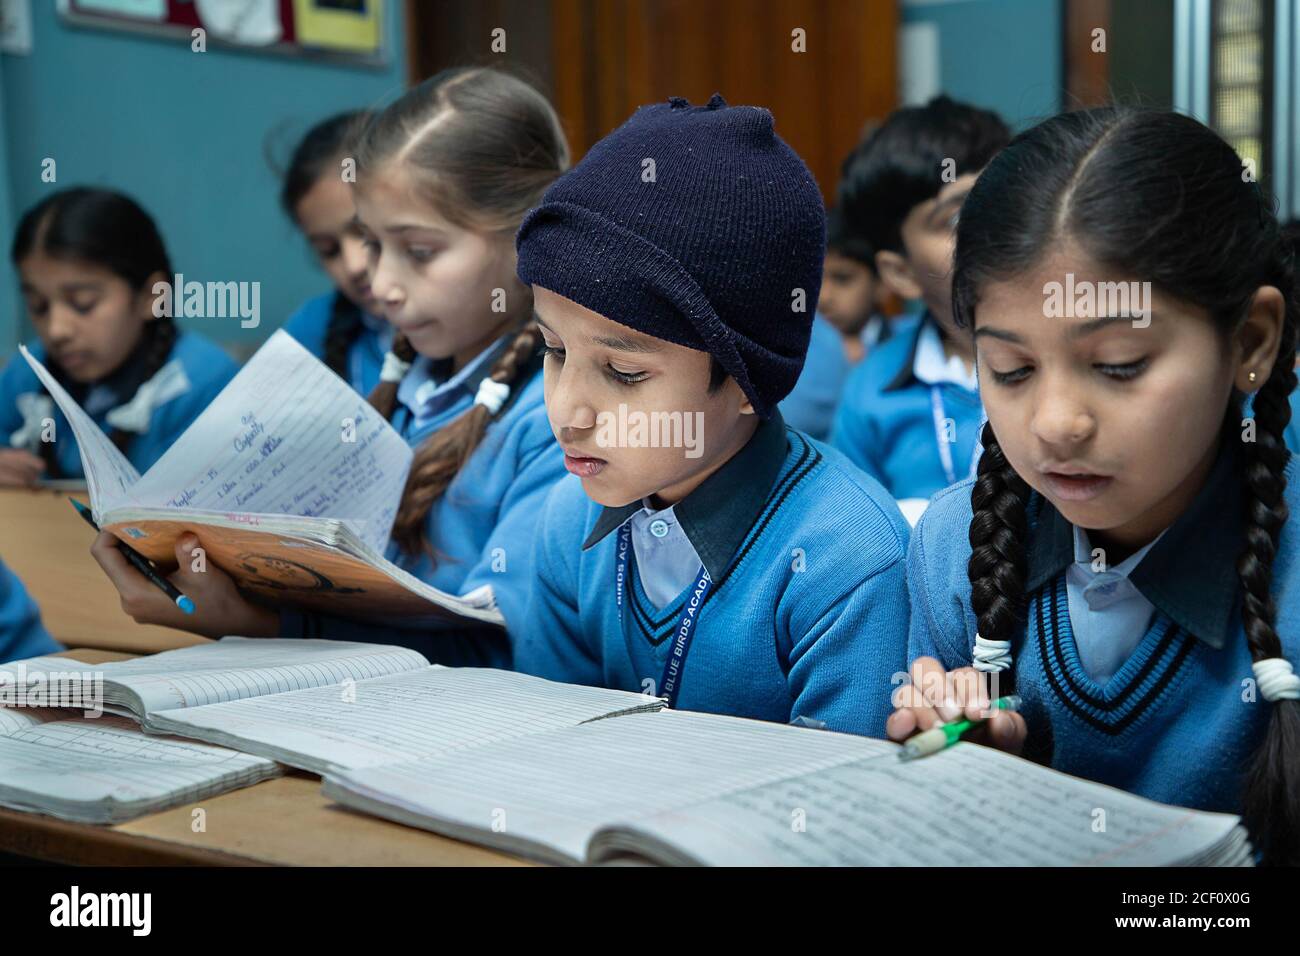 Jodhpur, Rajasthan, India - Jan 10th 2020: Primary indian students studying in the Classroom Taking Exam / Test Writing in Notebooks. education concep Stock Photo